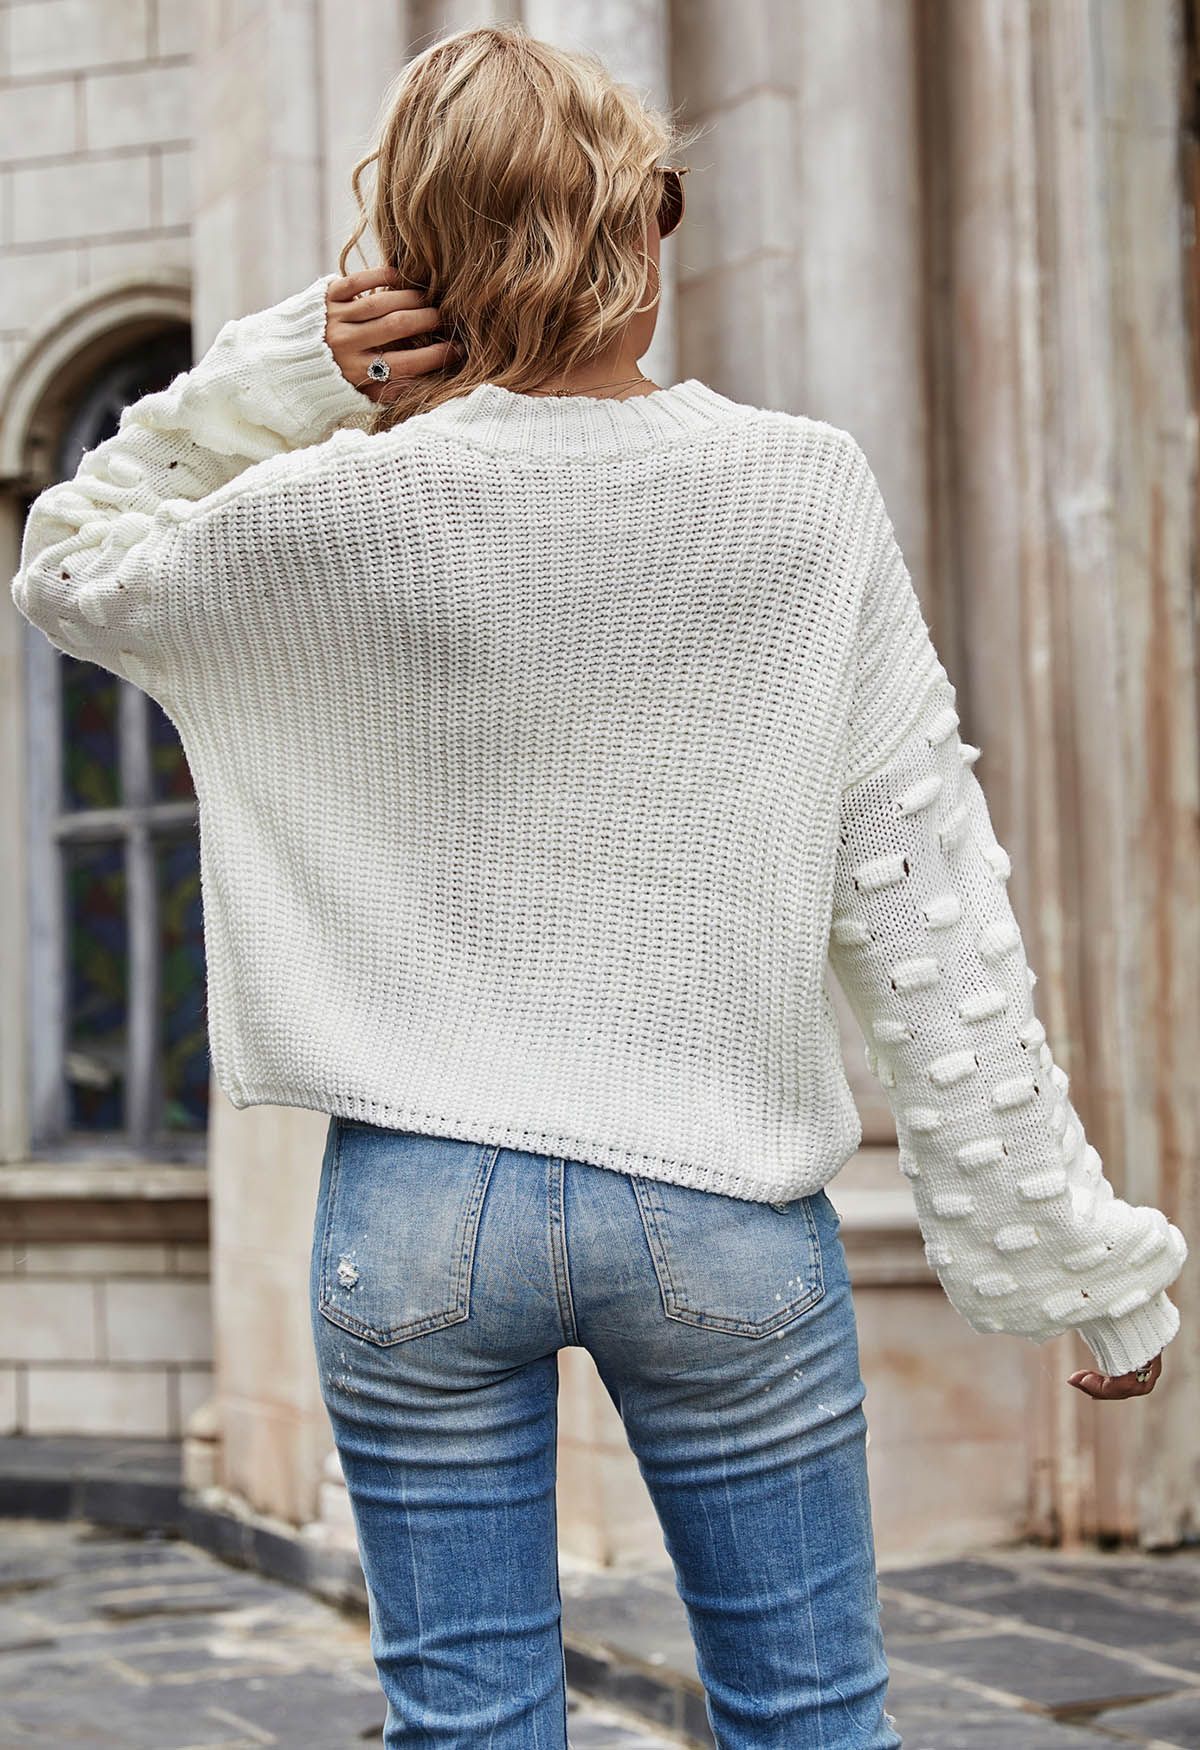 Playful Dotted Puff Sleeve Crop Sweater in White